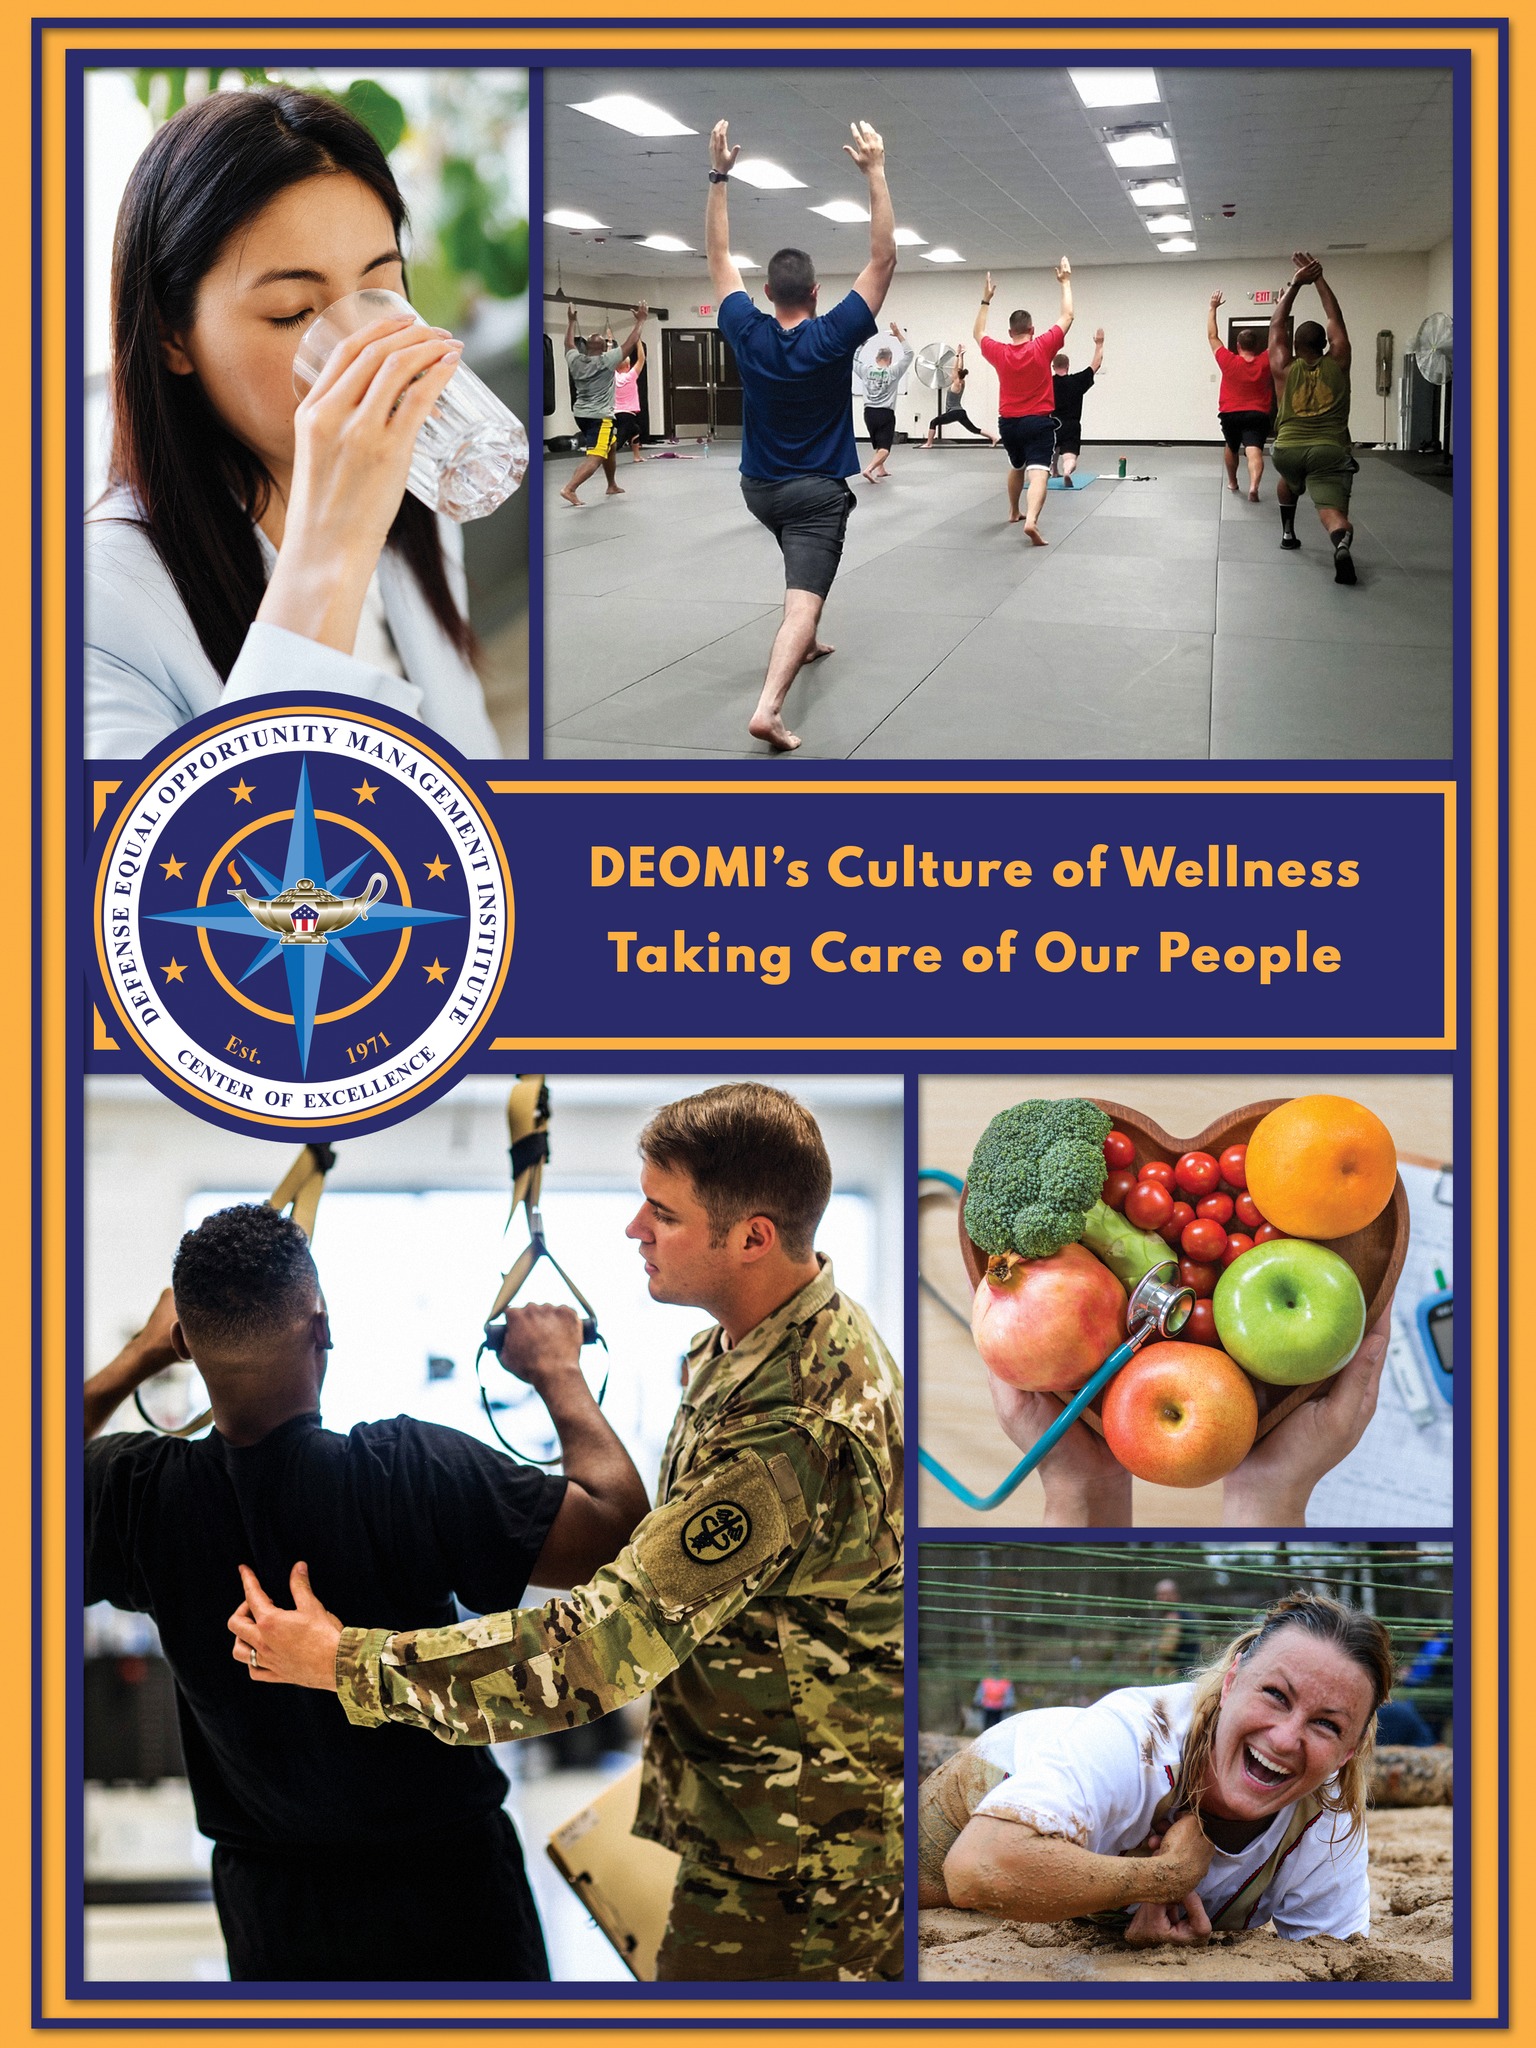 DEOMI's Culture of Wellness Taking Care of our People